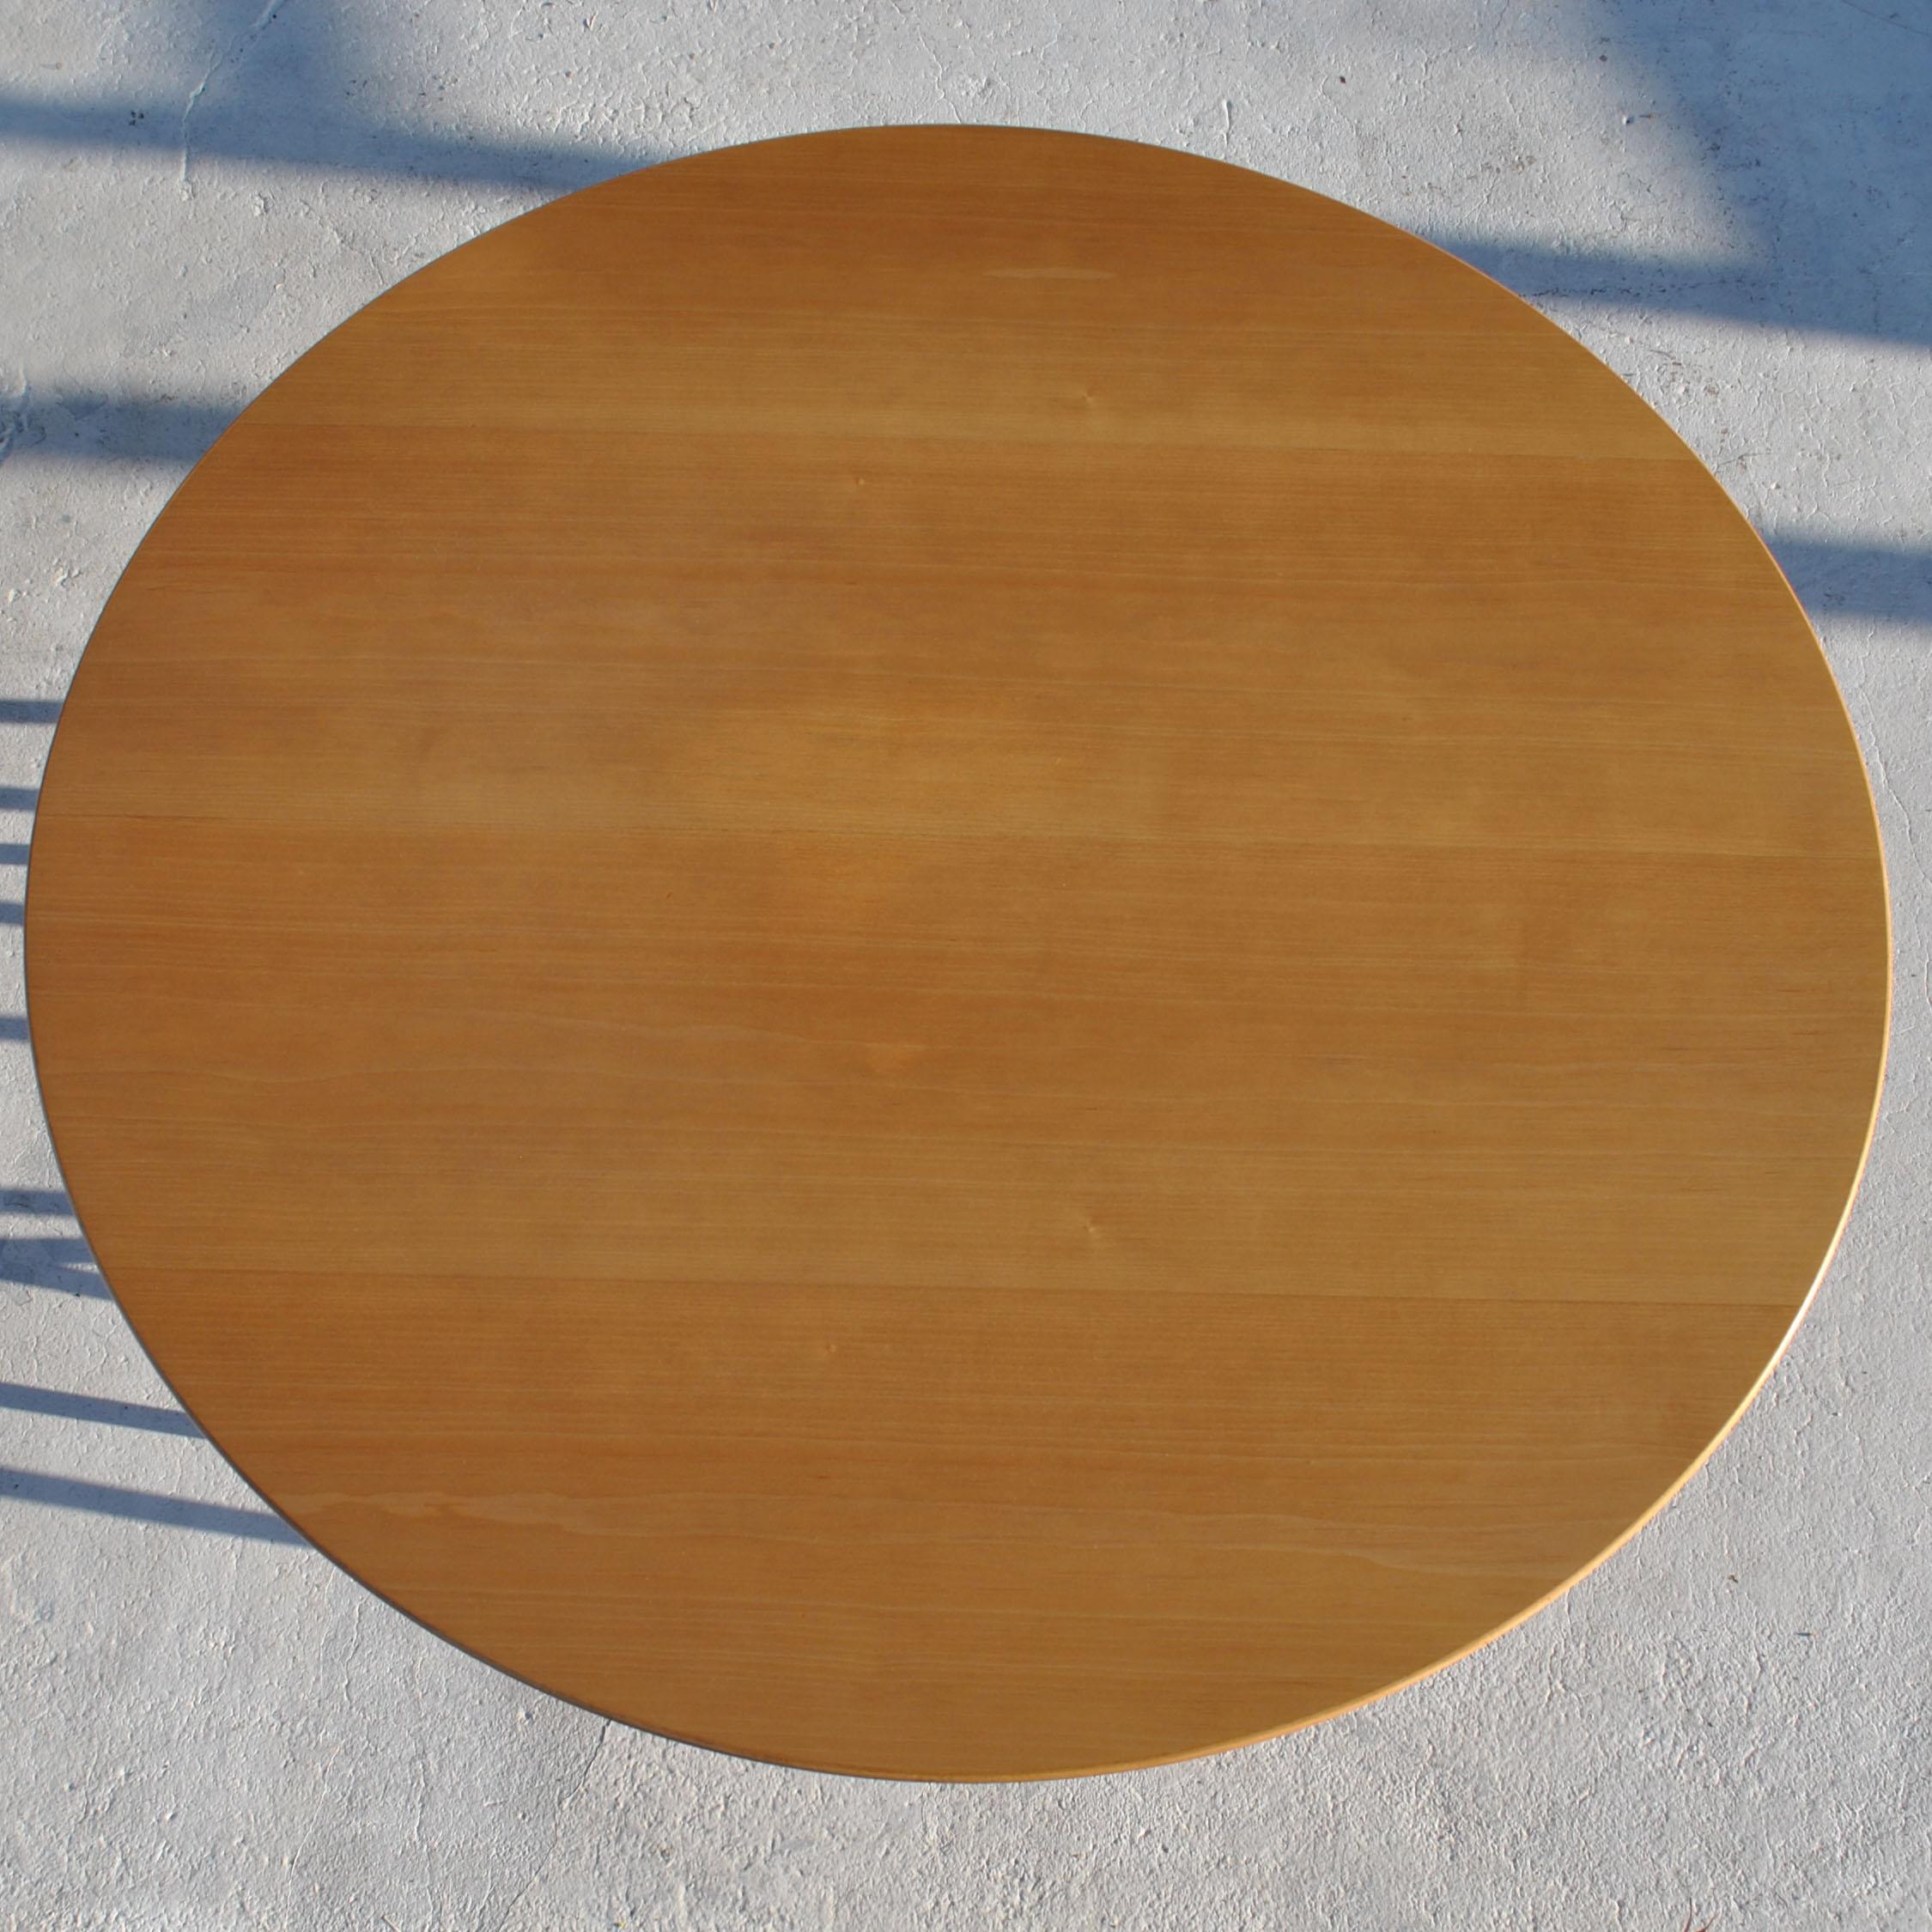 Round Toothpick Cactus Table by Lawrence Laske for Knoll In Good Condition For Sale In Pasadena, TX